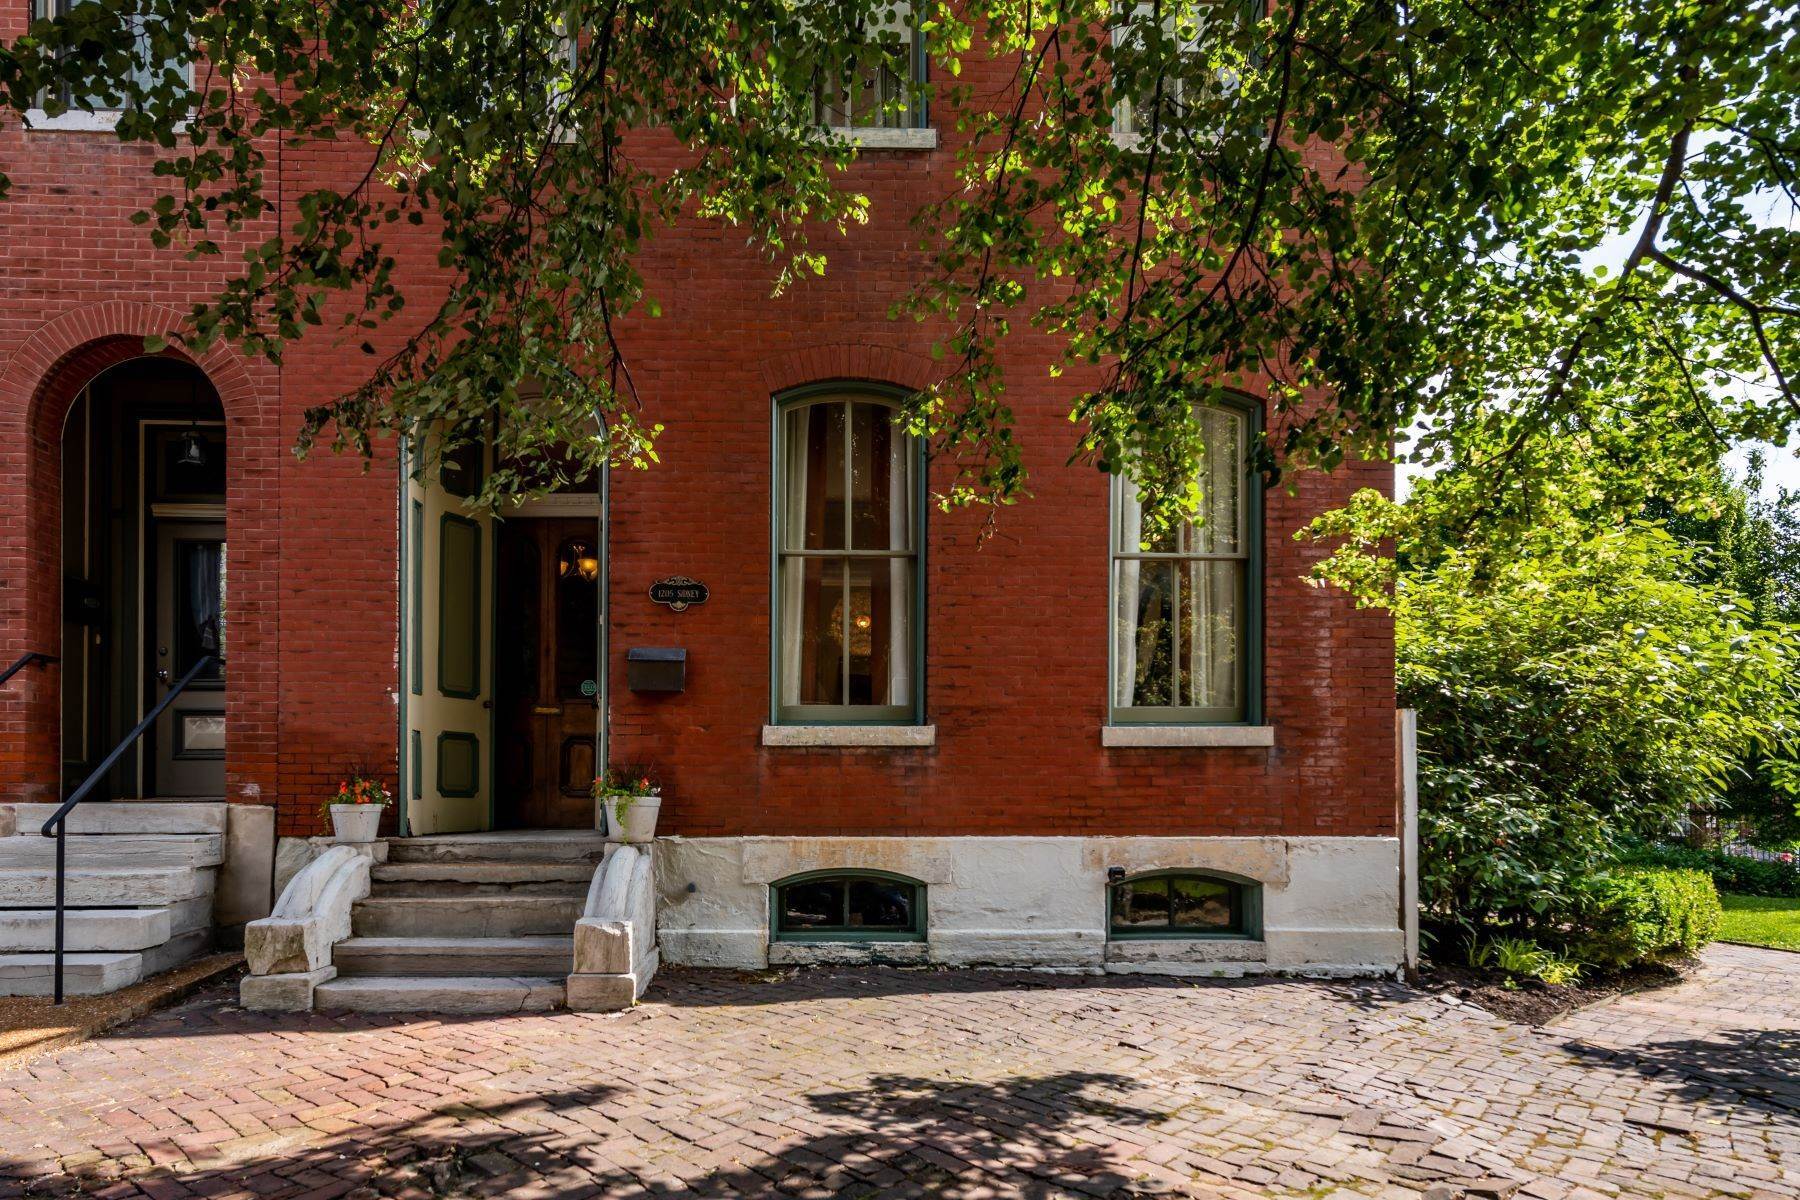 Property for Sale at An Important Soulard Home on a Beautifully Landscaped Triple Lot 1205 Sidney Street St. Louis, Missouri 63104 United States